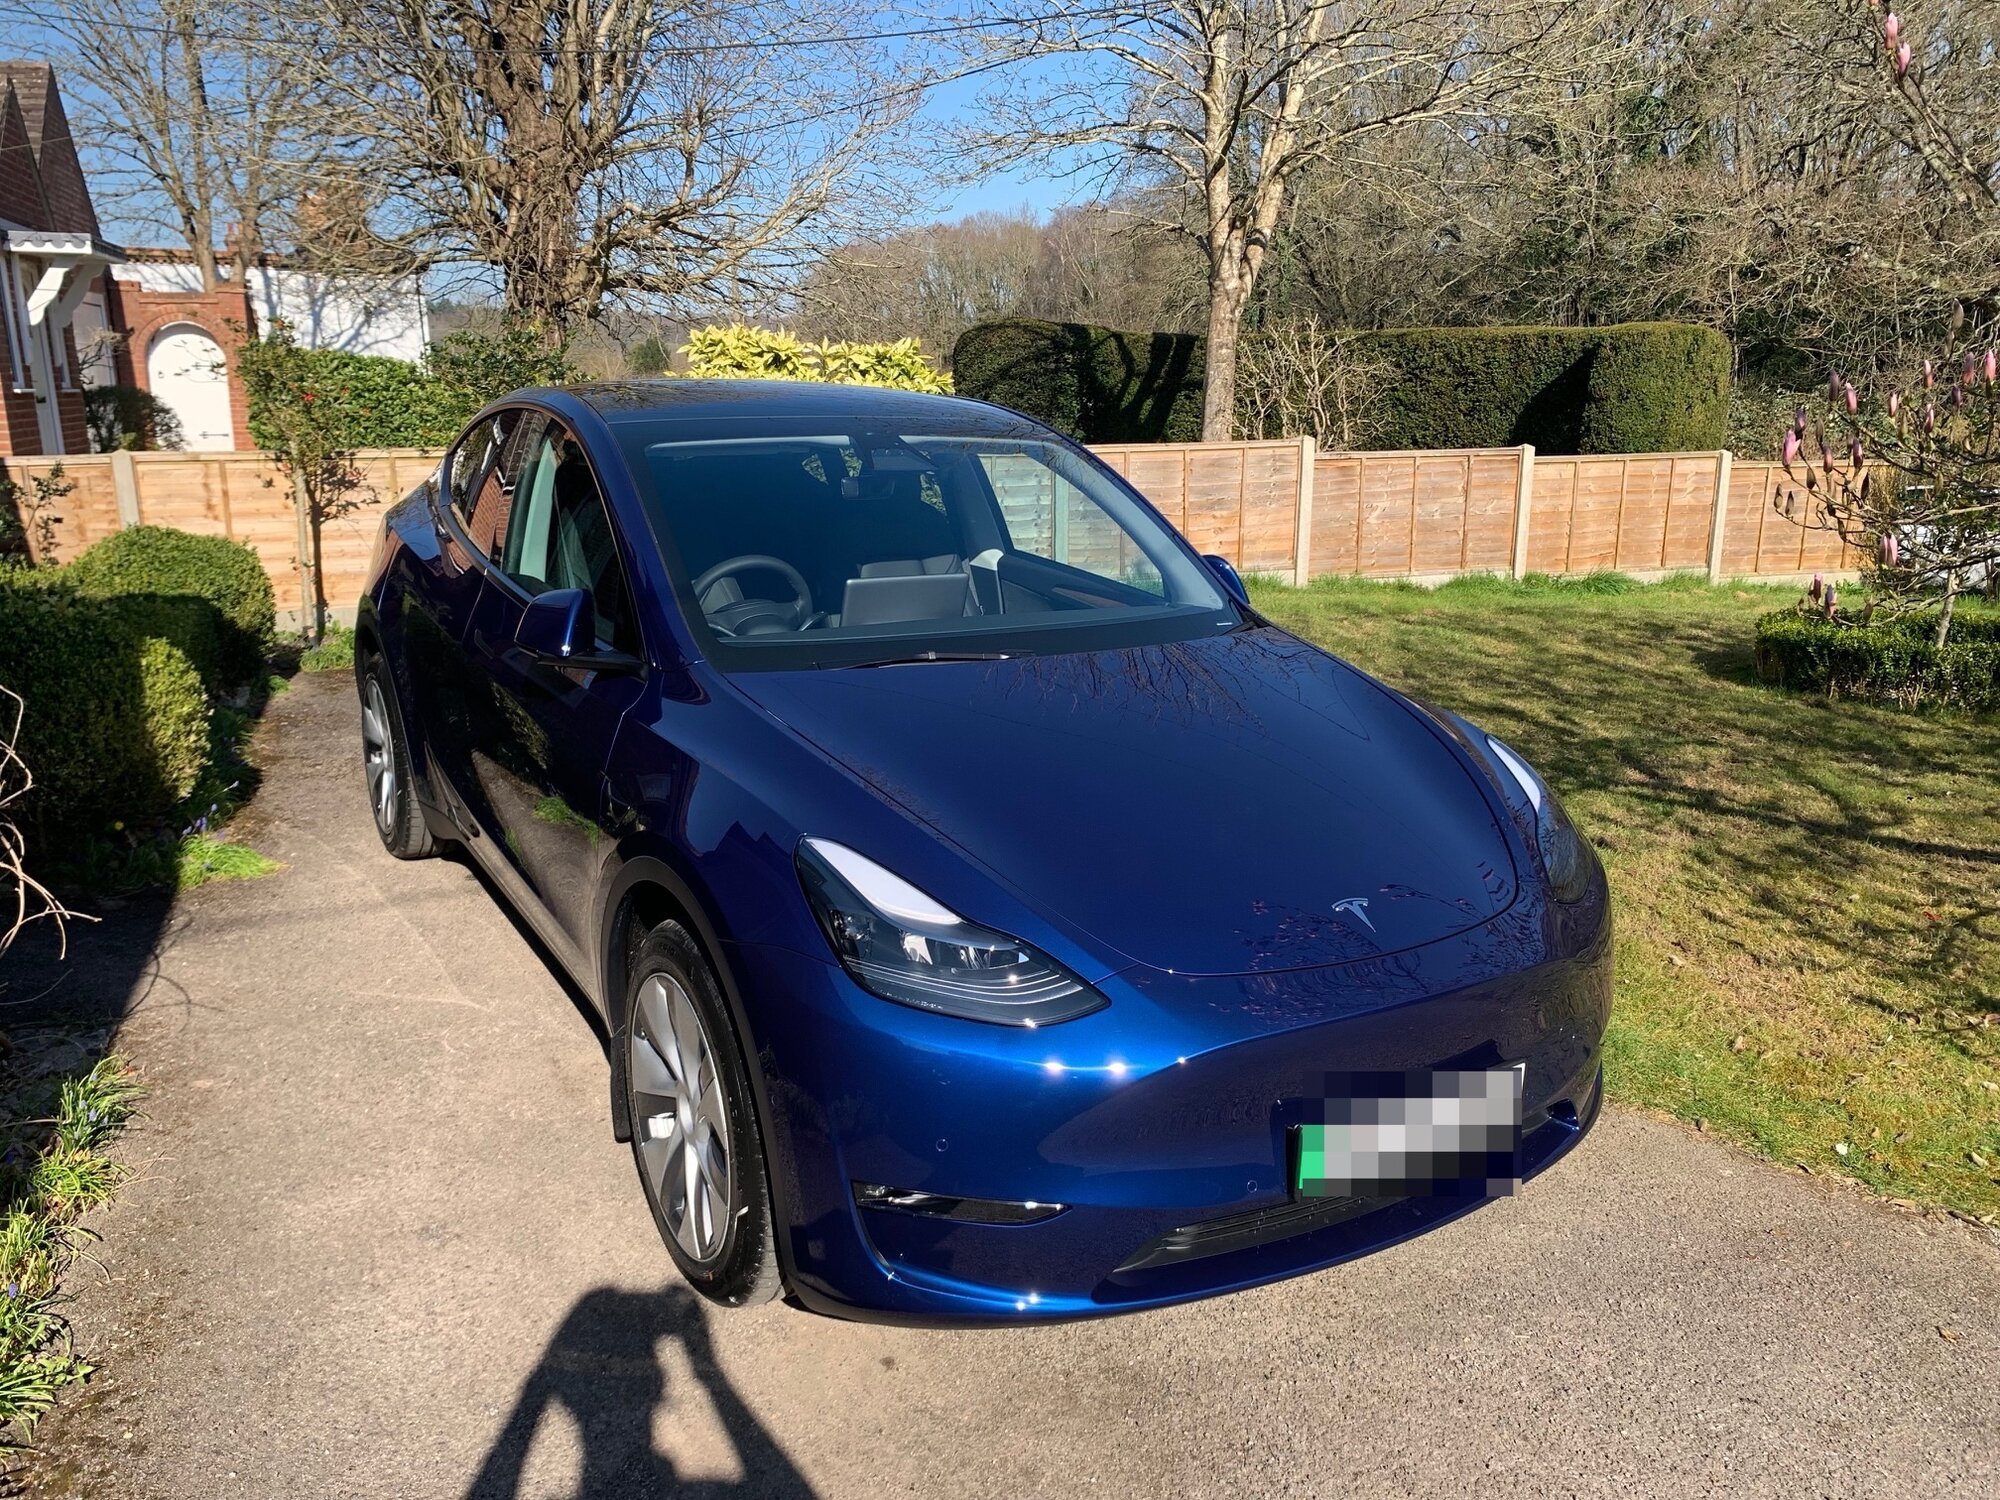 Post your day one Model Y and Model 3 UK pictures | Page 36 | Tesla ...